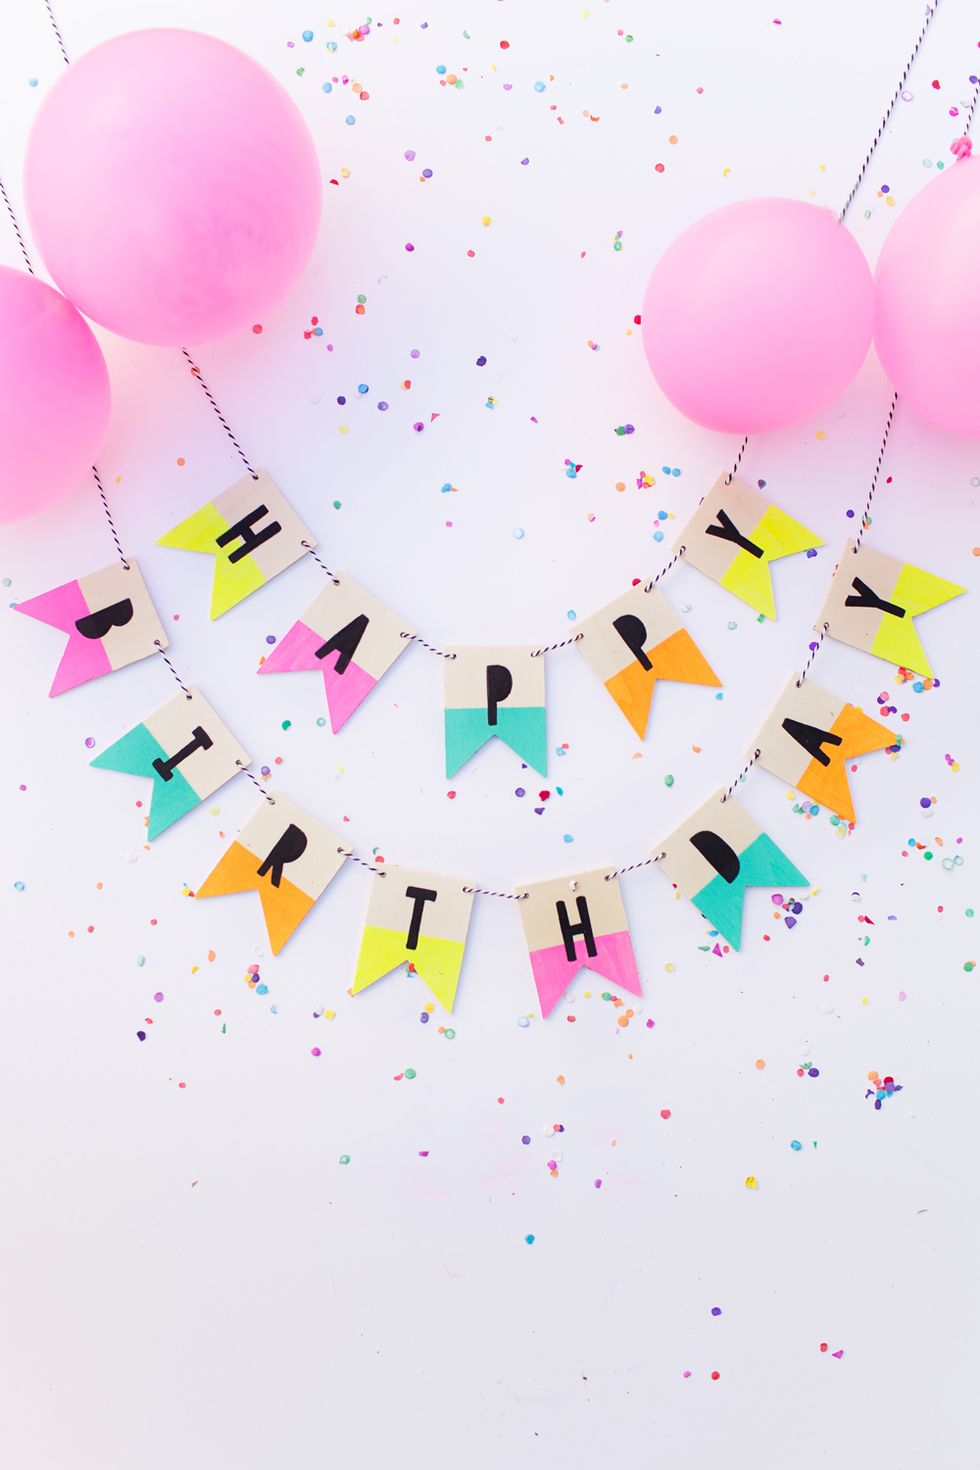 10 Ways to Decorate your Party with Cardboard Letters